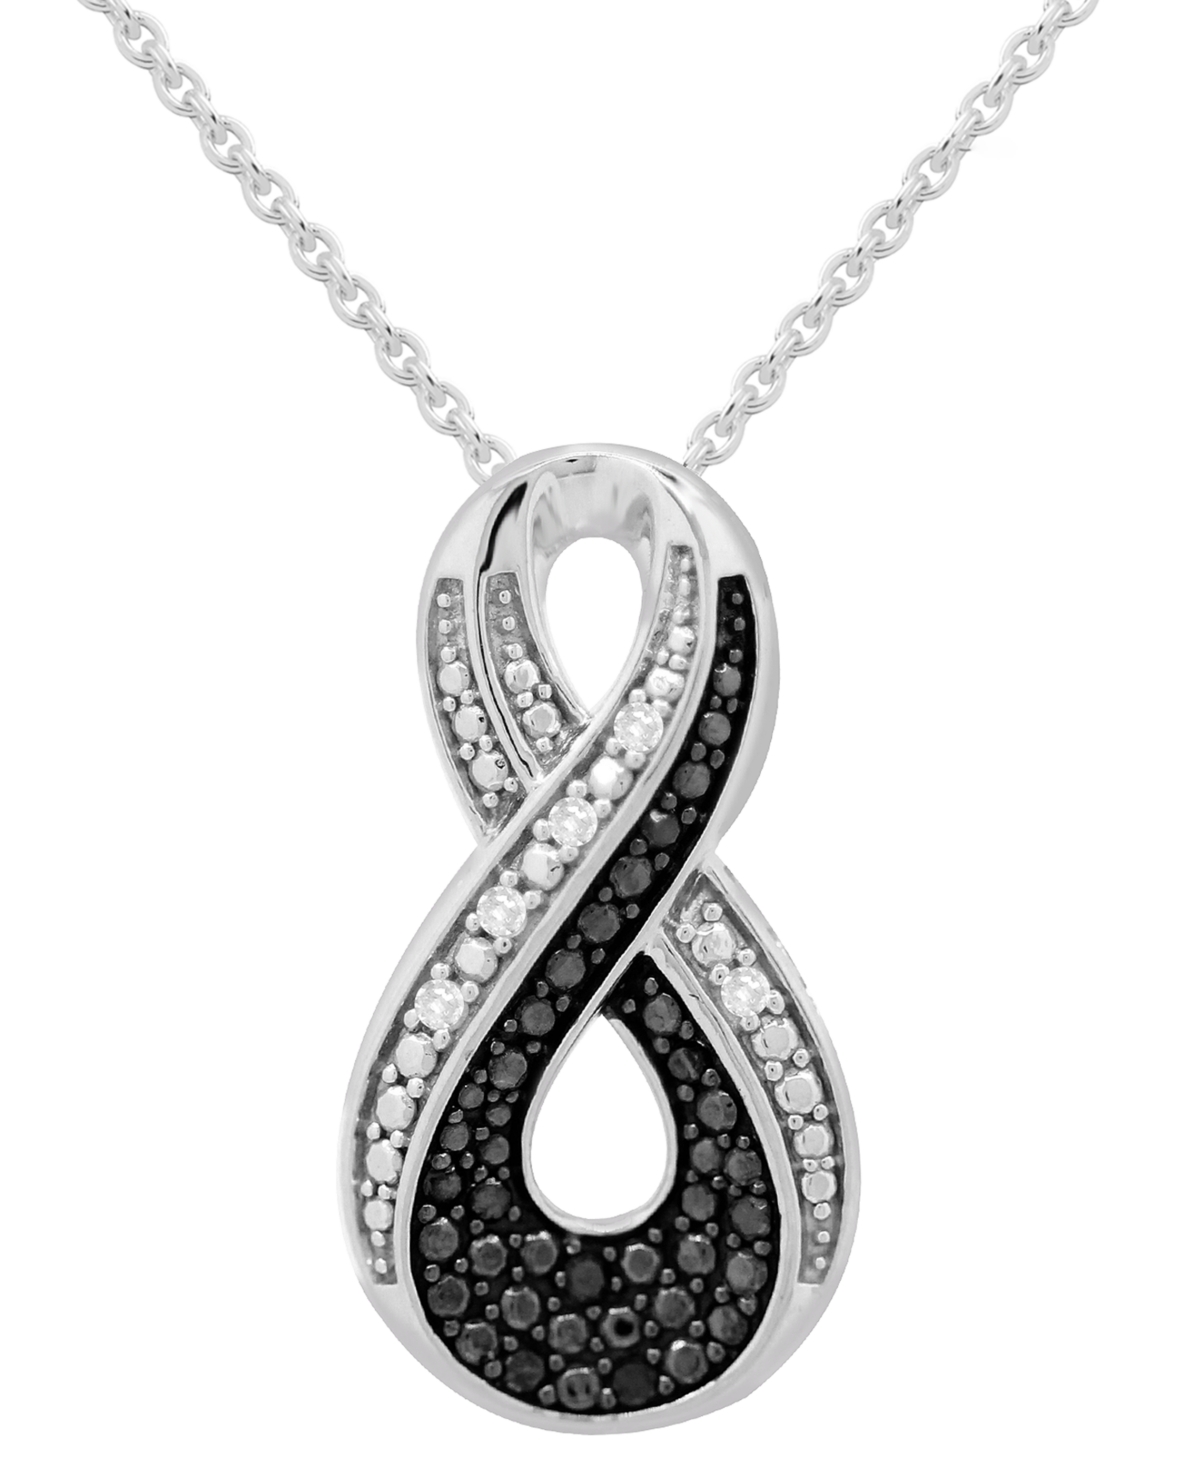 Black & White Diamond Infinity 18" Pendant Necklace (1/6 ct. t.w.) in Sterling Silver - Sterling Silver